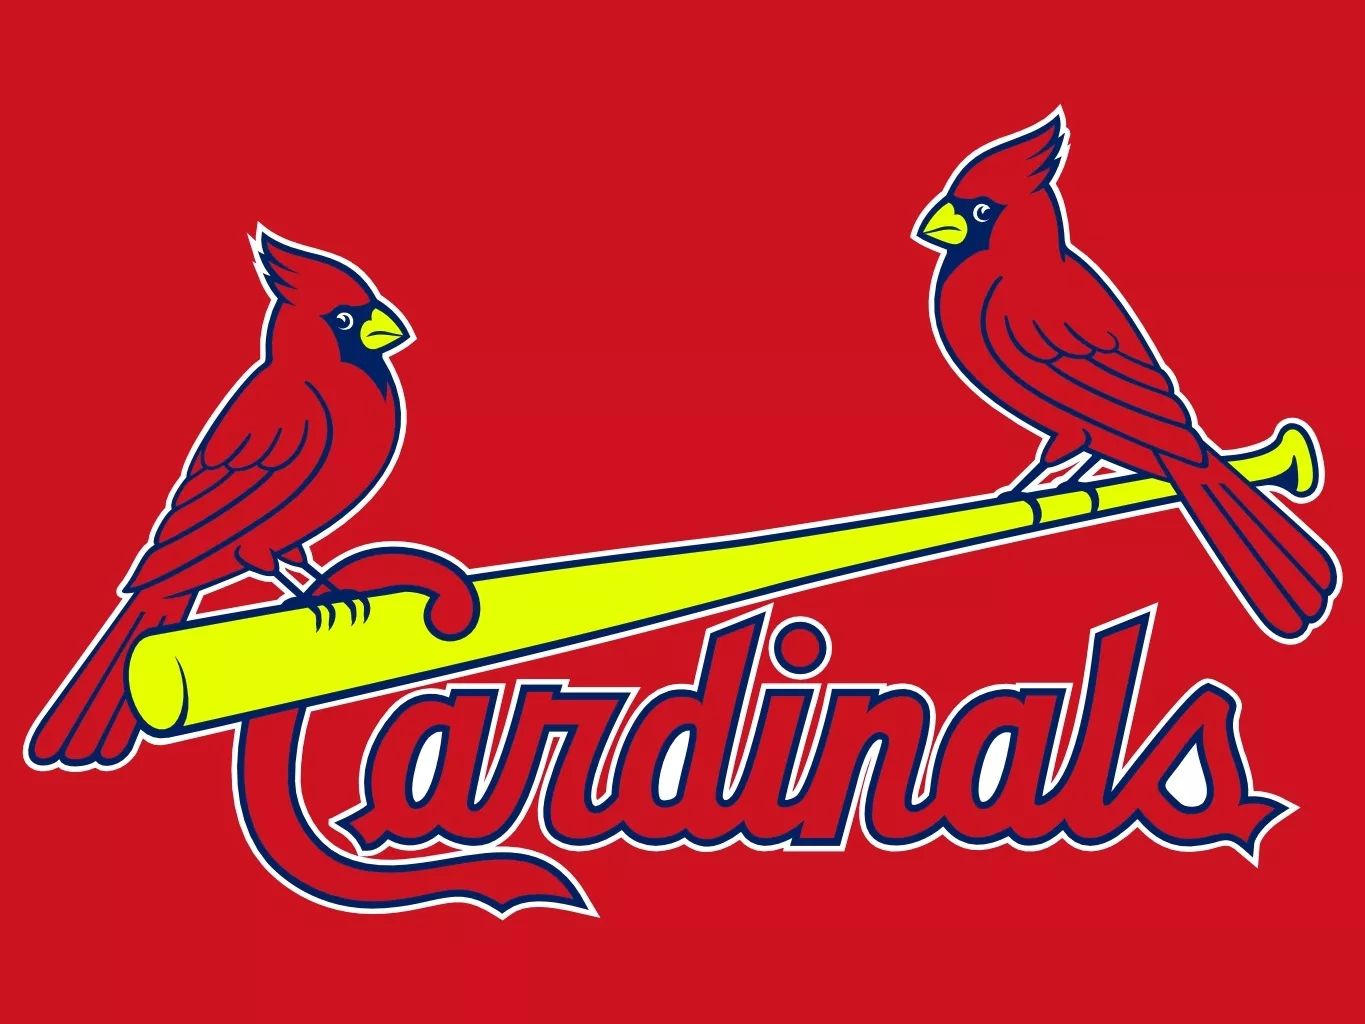 St. Louis Cardinals Baseball Facility Robbed in Dominican Republic